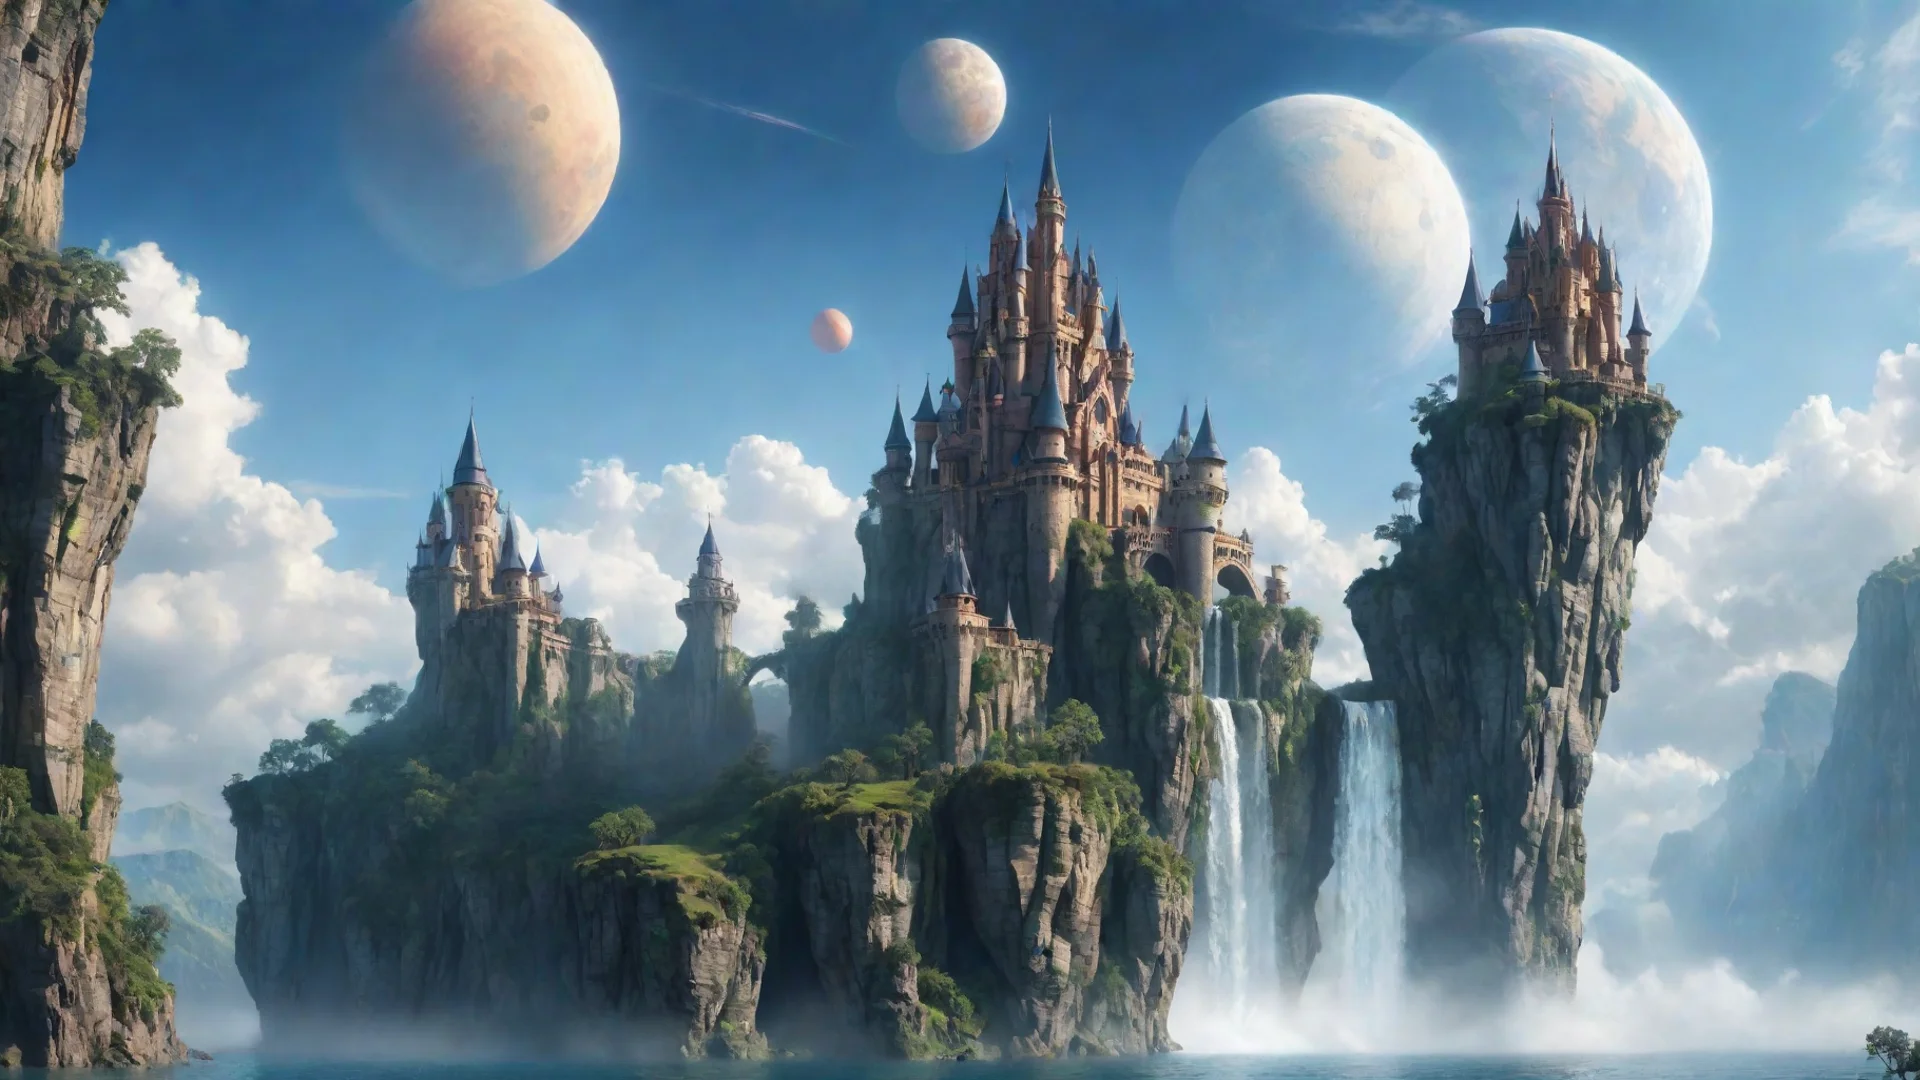 peaceful castle in sky epic floating castle on floating cliffs with waterfalls down beautiful sky with saturn planets wide